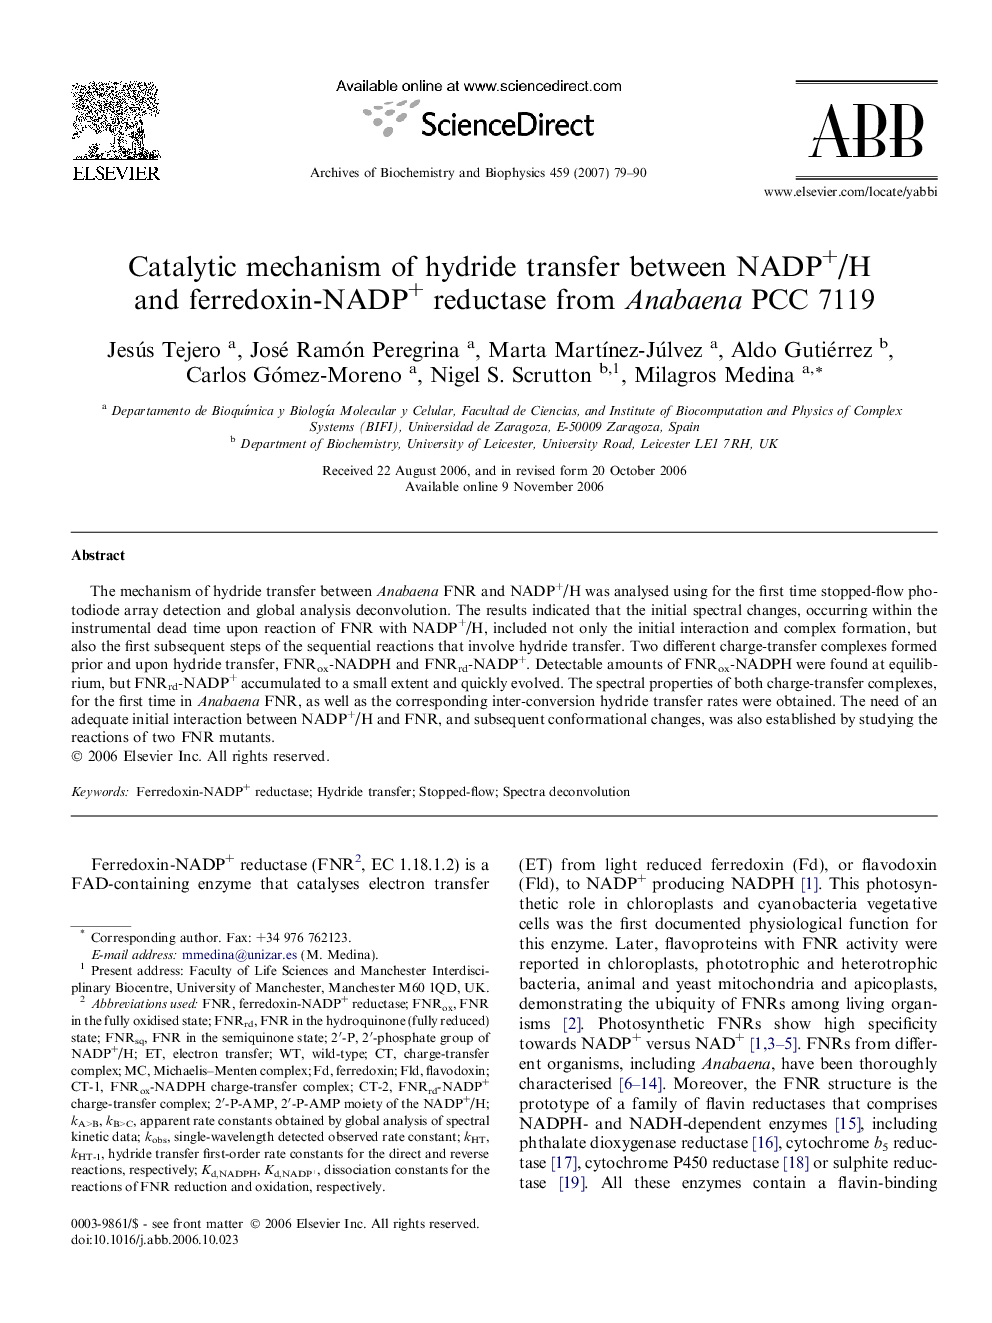 Catalytic mechanism of hydride transfer between NADP+/H and ferredoxin-NADP+ reductase from Anabaena PCC 7119